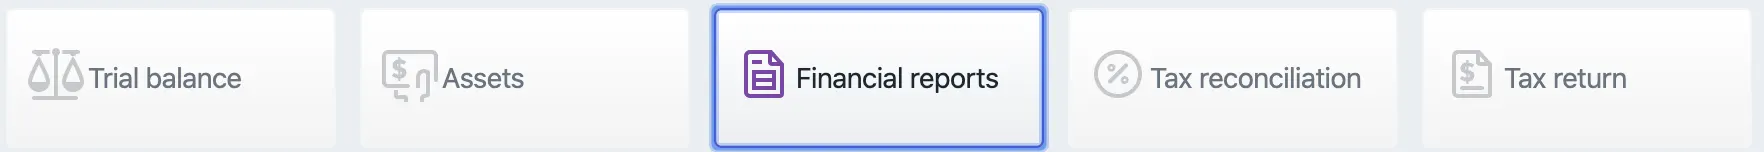 Financial reports tab selected next to Trial Balance, Assets, Tax reconciliation and Tax return tabs.